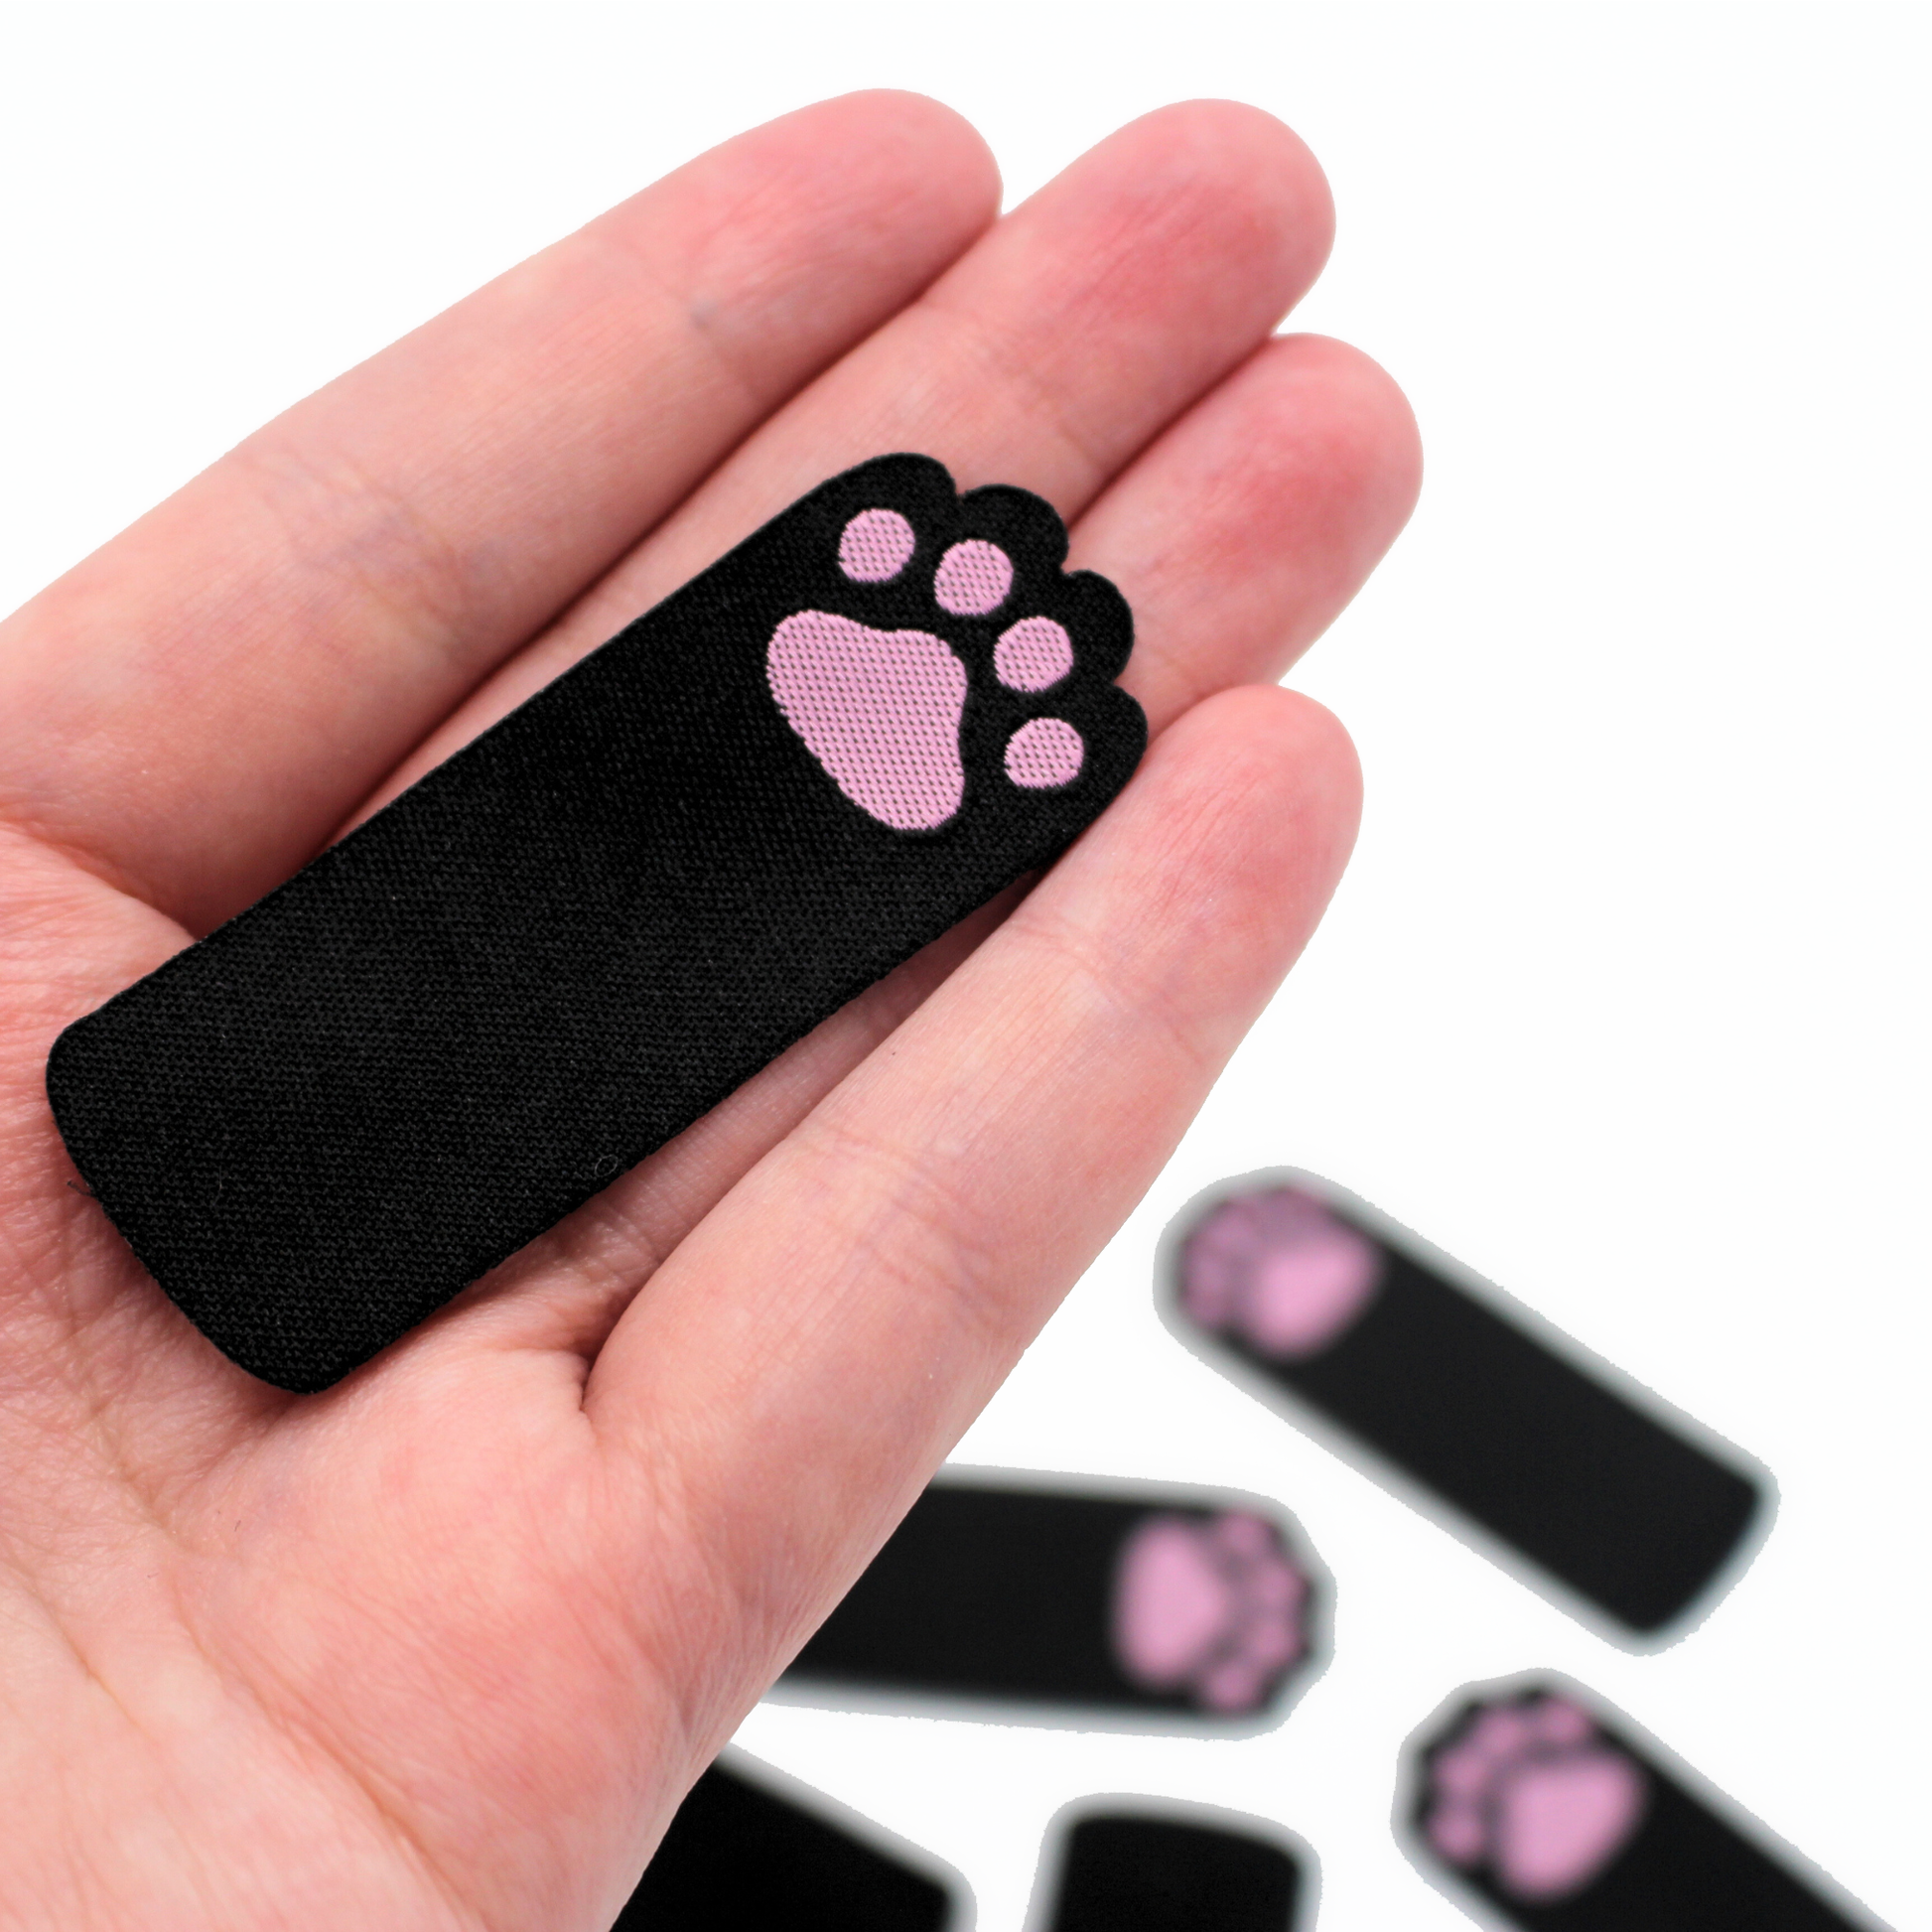 Cat Paw | Silhouette LabelsSew AnonymousA cute black cat paw featuring